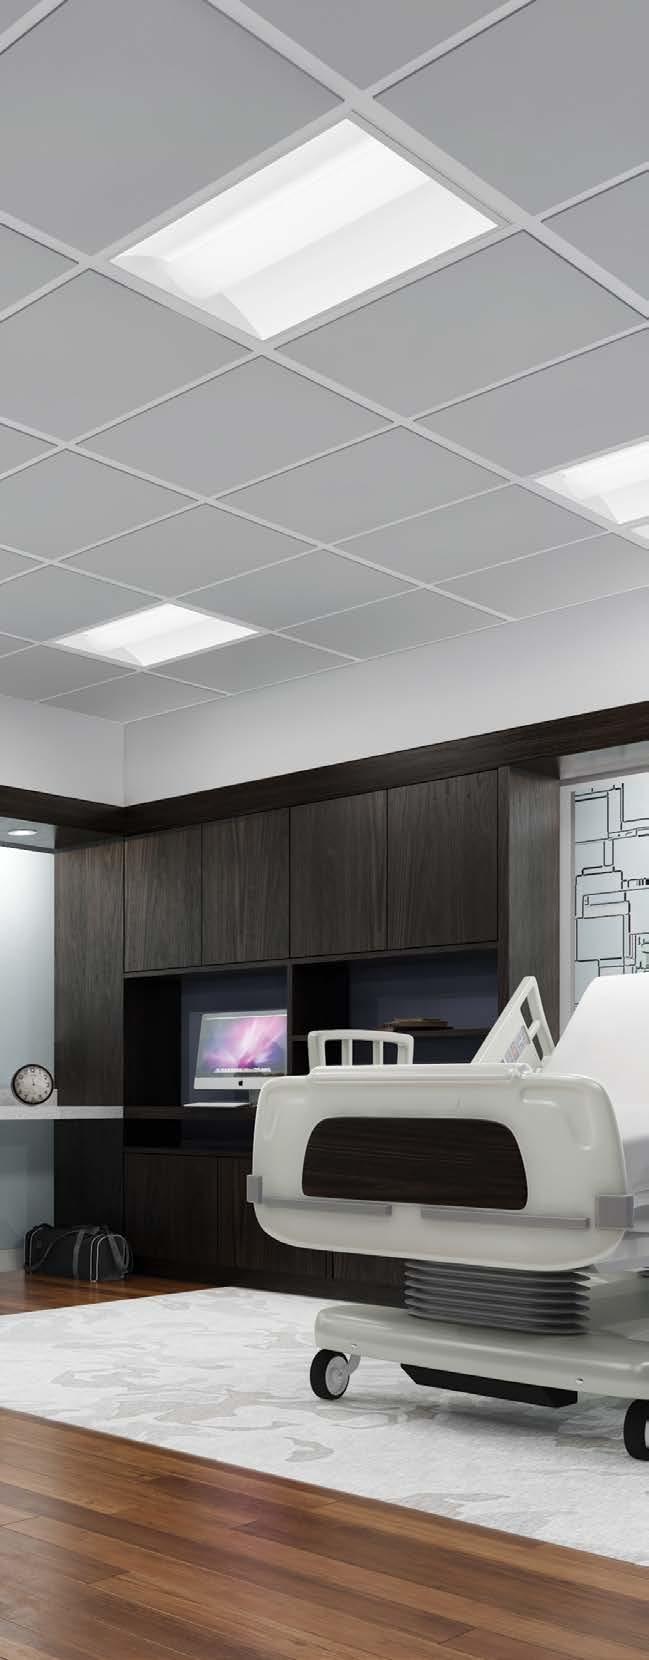 METALUX METALUX Cruze Cruze This innovative, high quality luminaire is dedicated to the latest solid state lighting and driver technology for optimal performance and energy efficiency.